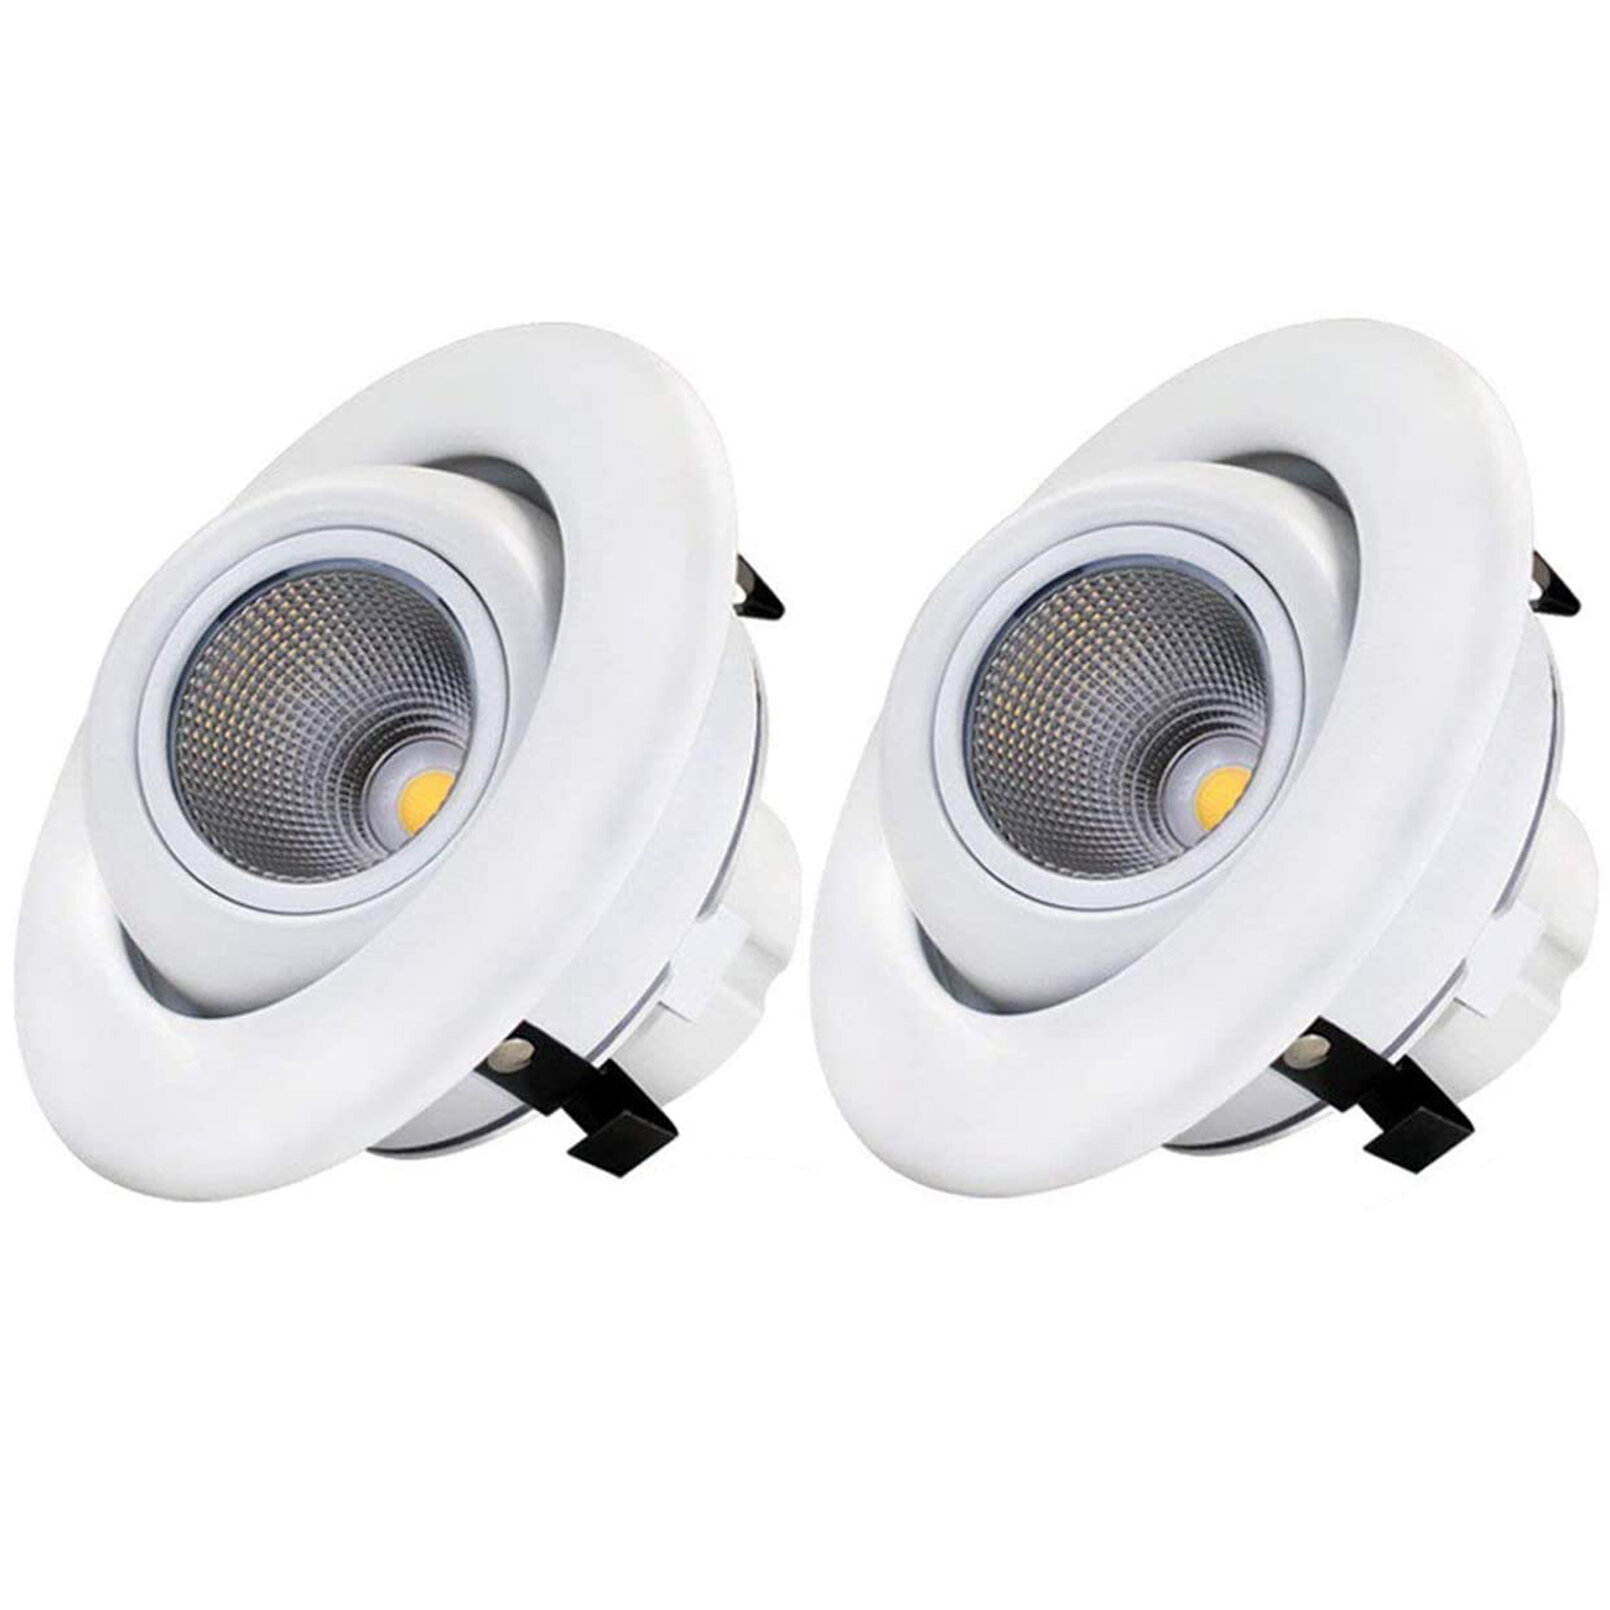 4 Inch Pot LED Lights with Junction Box Dimmable 9W 740LM 75W Equiv 5000K Daylight White Slim LED Downlight ETL Energy Star Certificated 2 Pack 